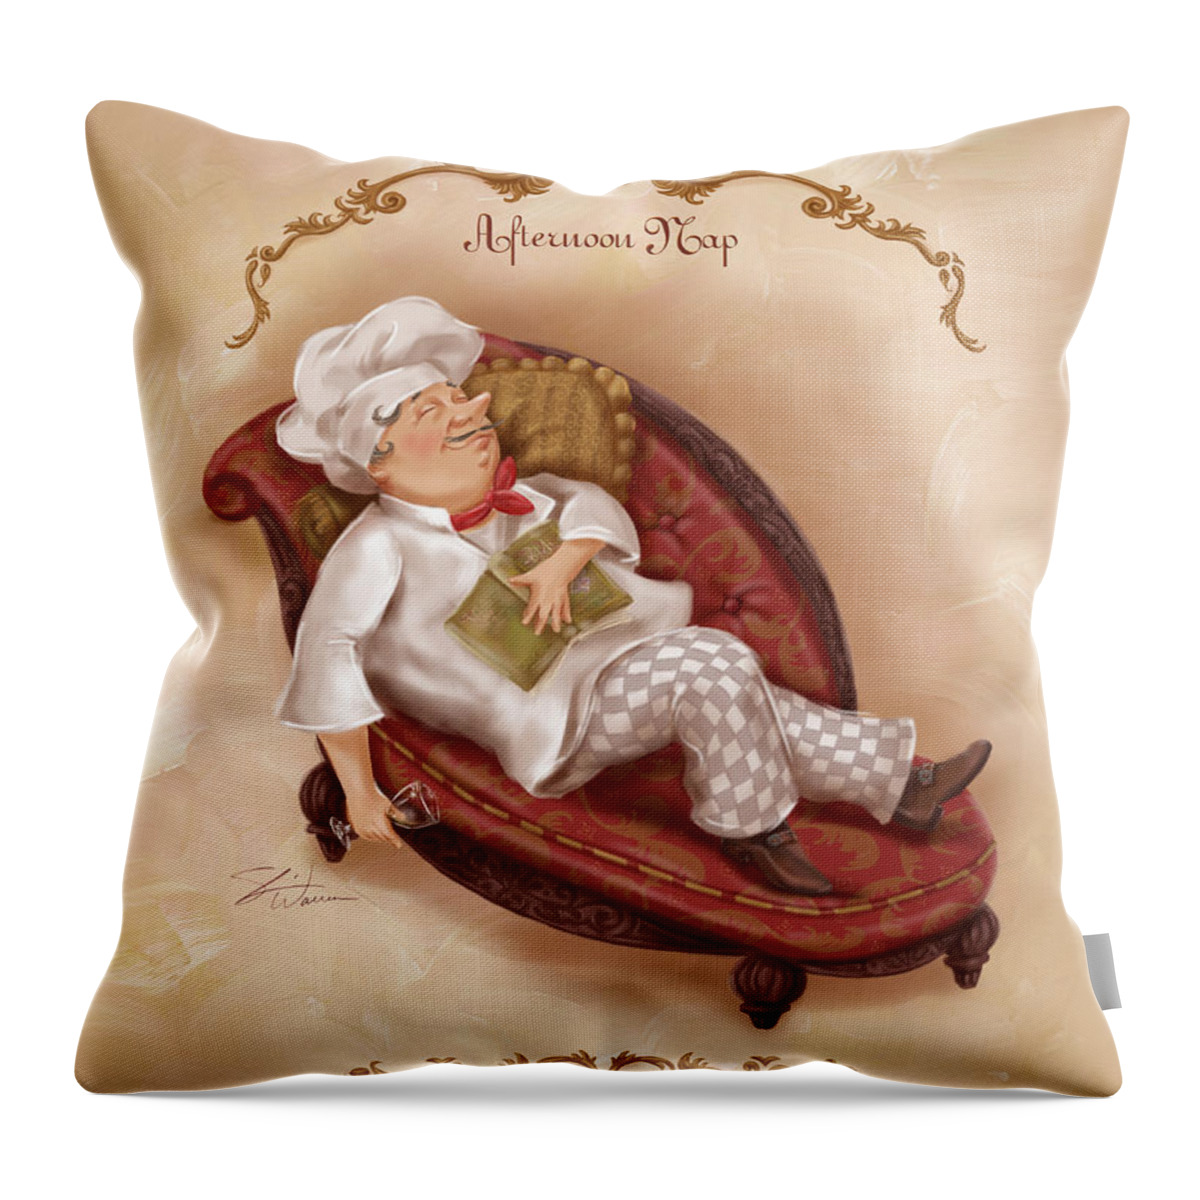 Chef Throw Pillow featuring the mixed media Chefs on a Break-Afternoon Nap by Shari Warren